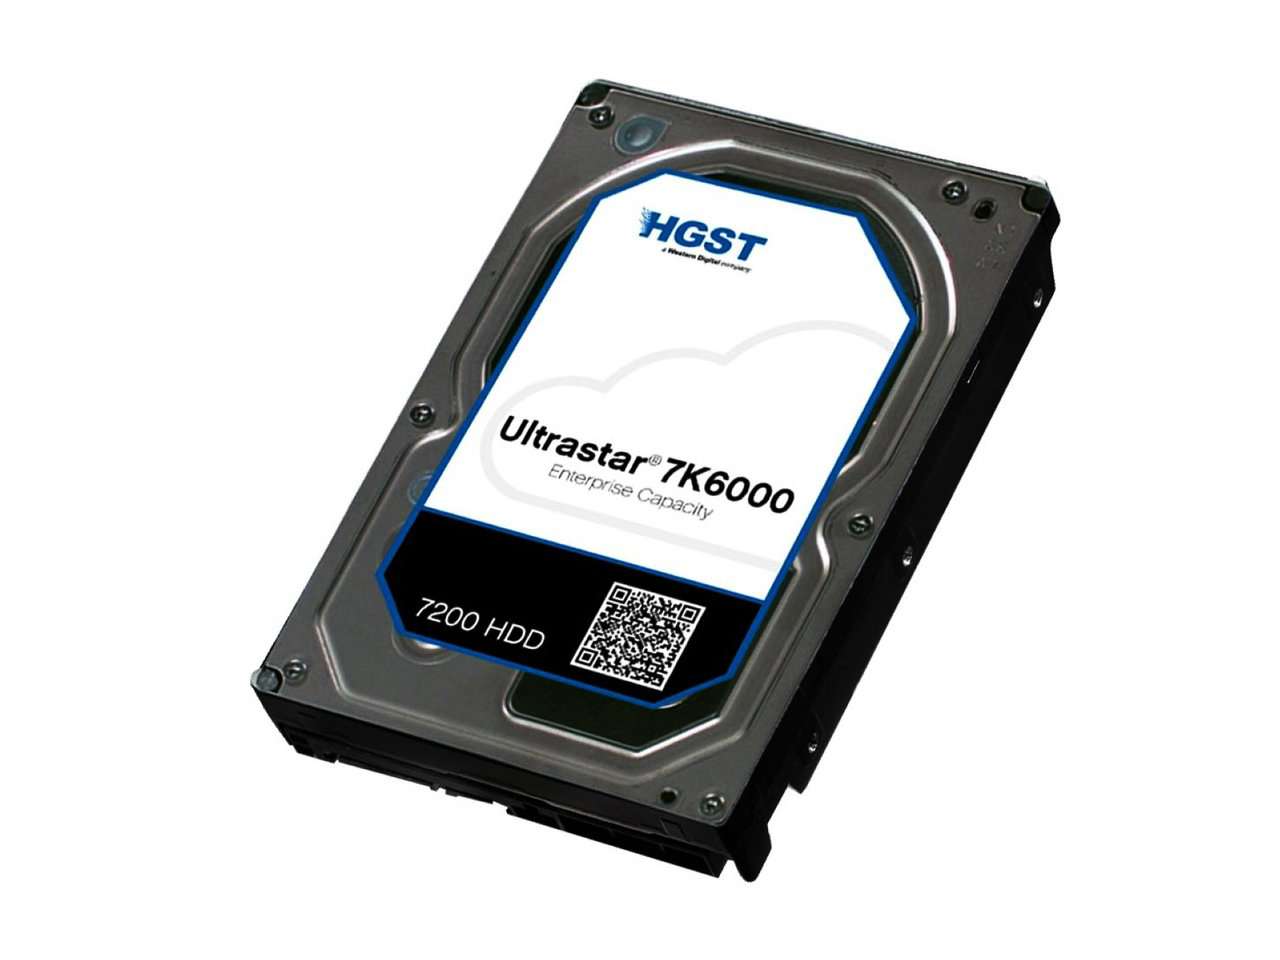 HGST Ultrastar 7K6000 0F22828  HUS726020AL4215 2TB 7.2K RPM SAS 12Gb/s 4Kn 128MB Cache 3.5" TCG FIPS Manufacturer Recertified HDD